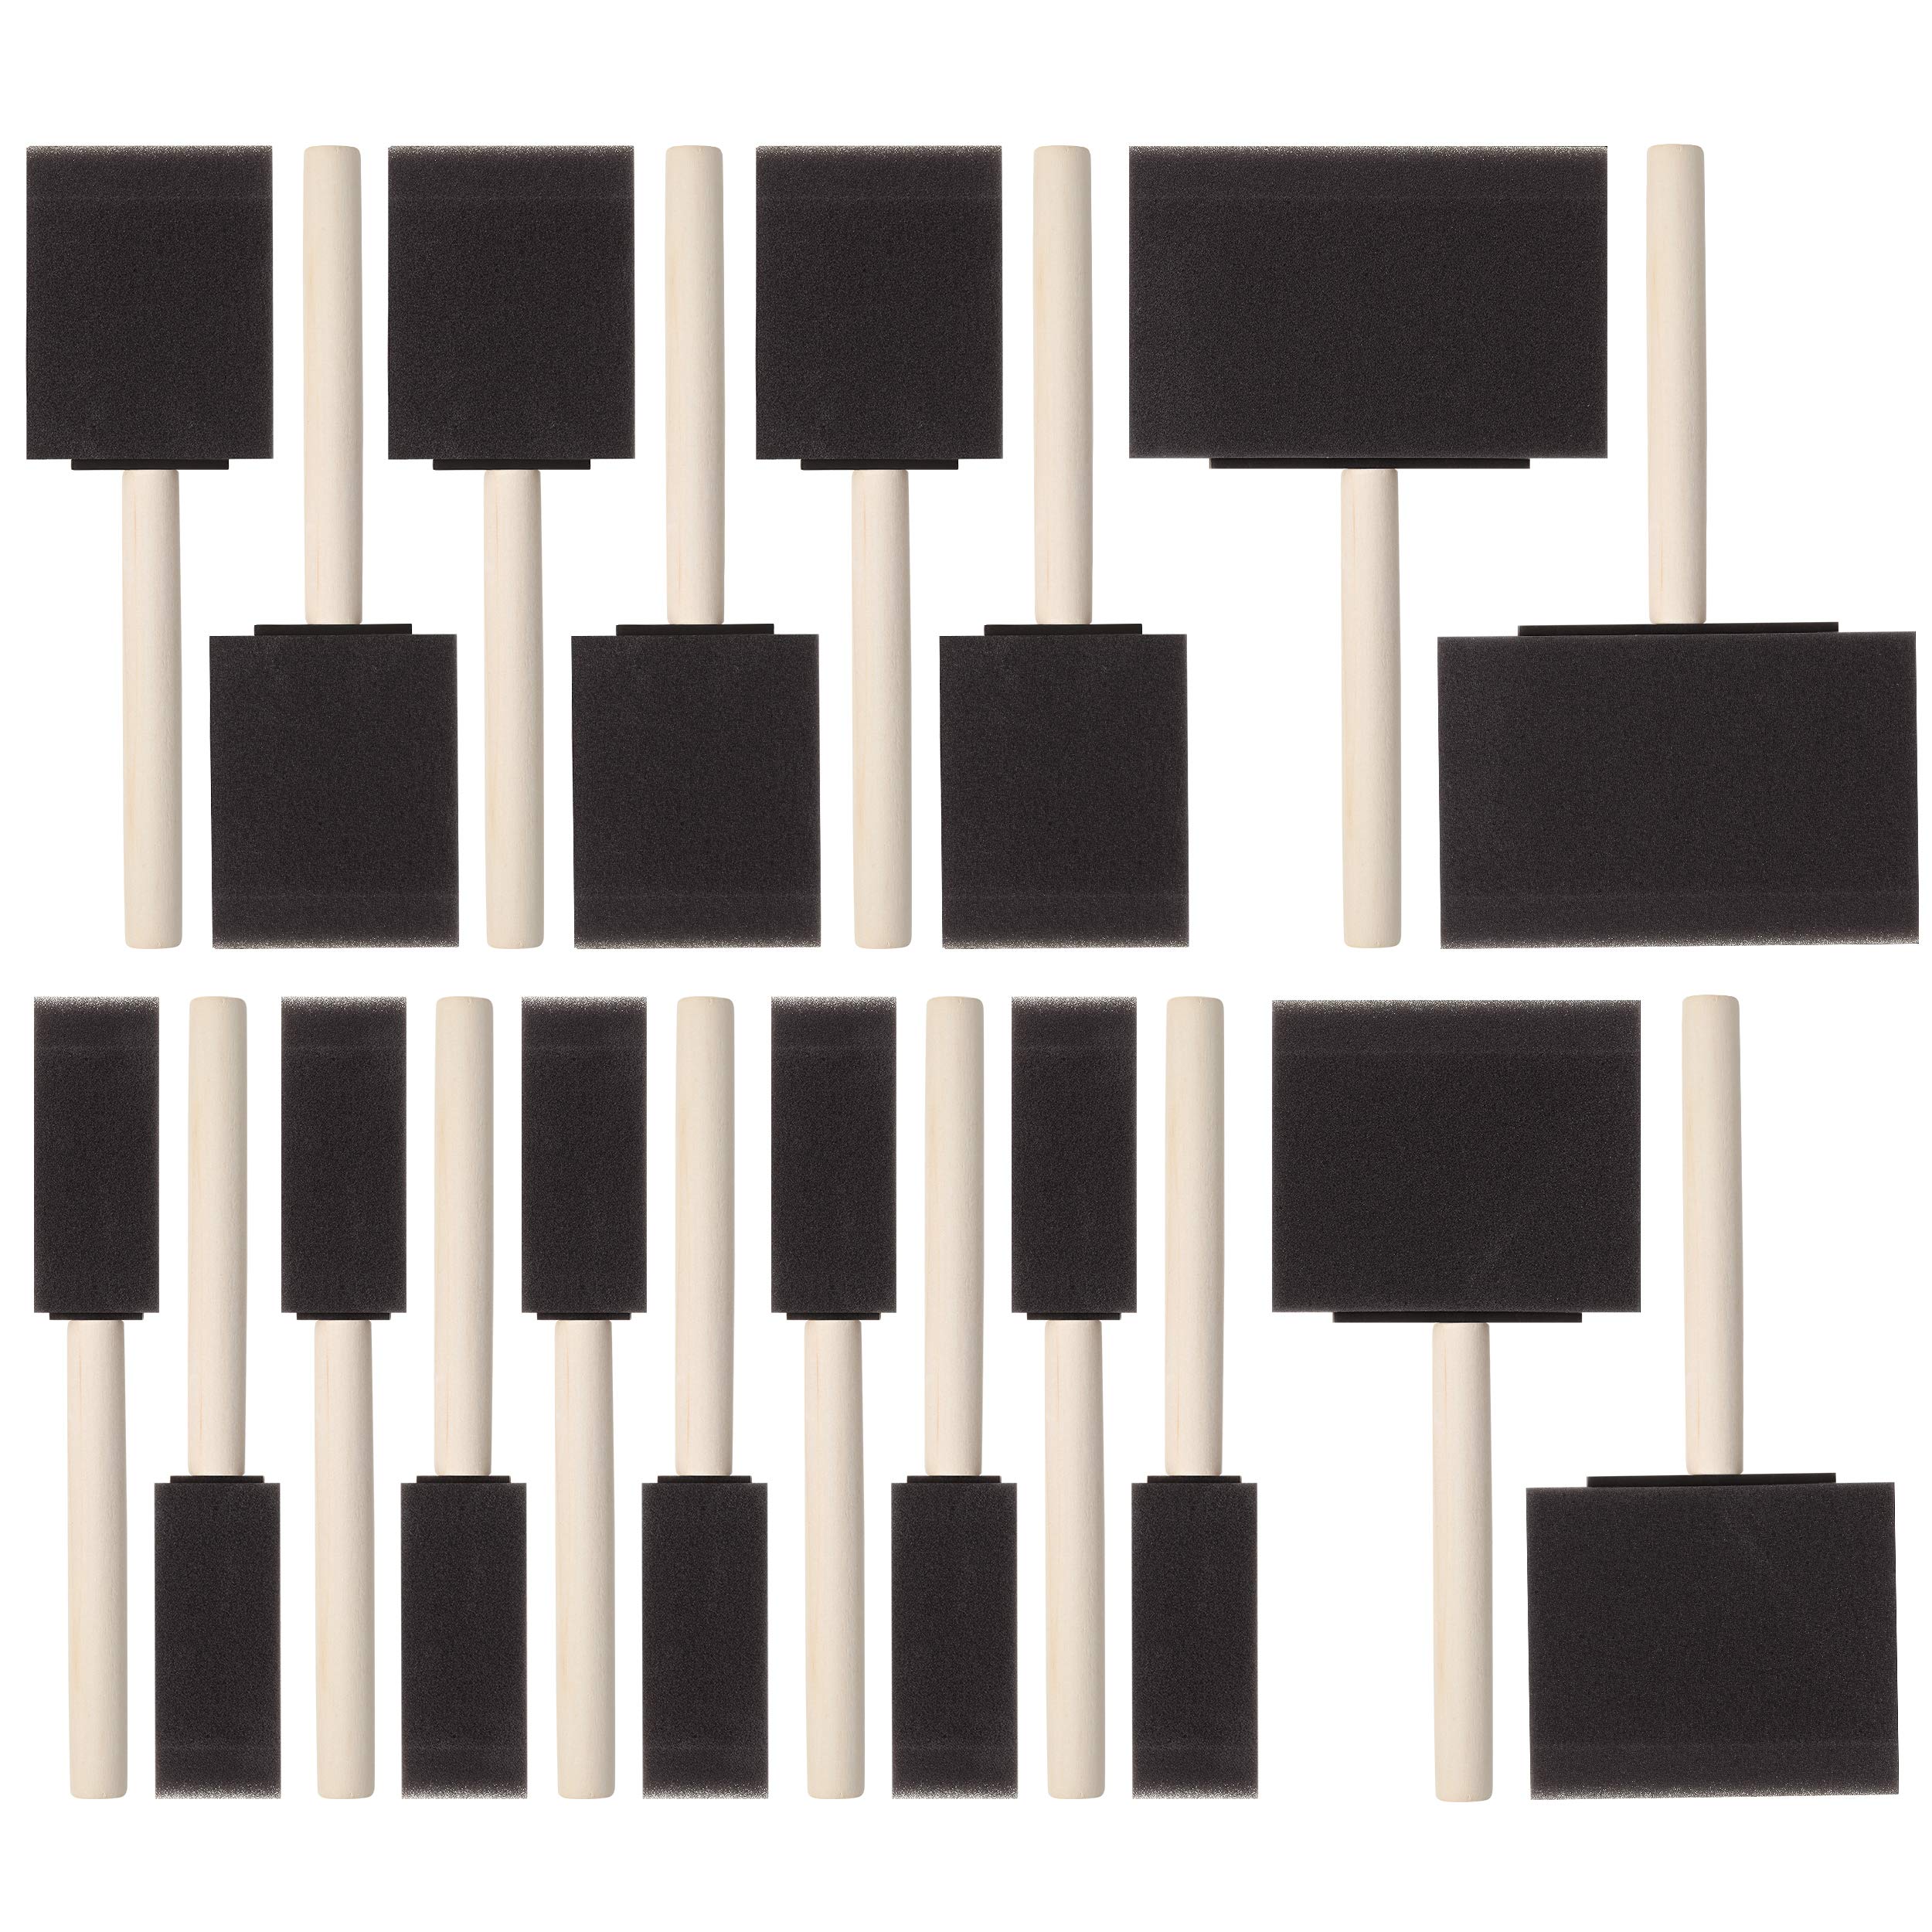 Bates- Foam Paint Brushes Assorted Sizes 20 Pack Sponge Paint Brush Foam  Brushes Foam Brushes for Painting Foam Brushes for Staining Foam Brushes  for Polyurethane Sponge Brushes for Painting